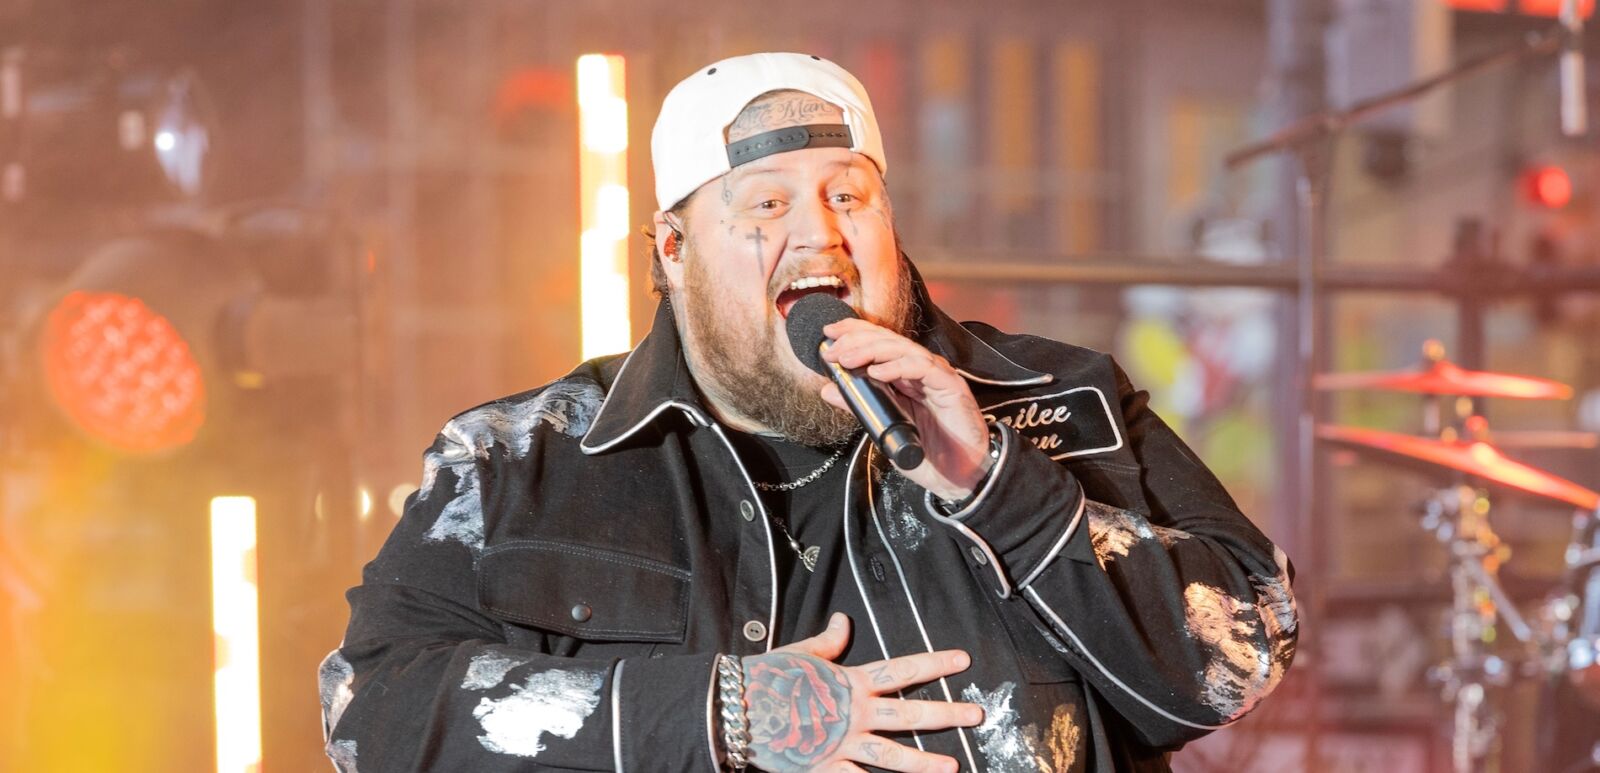 Jelly Roll performs live.